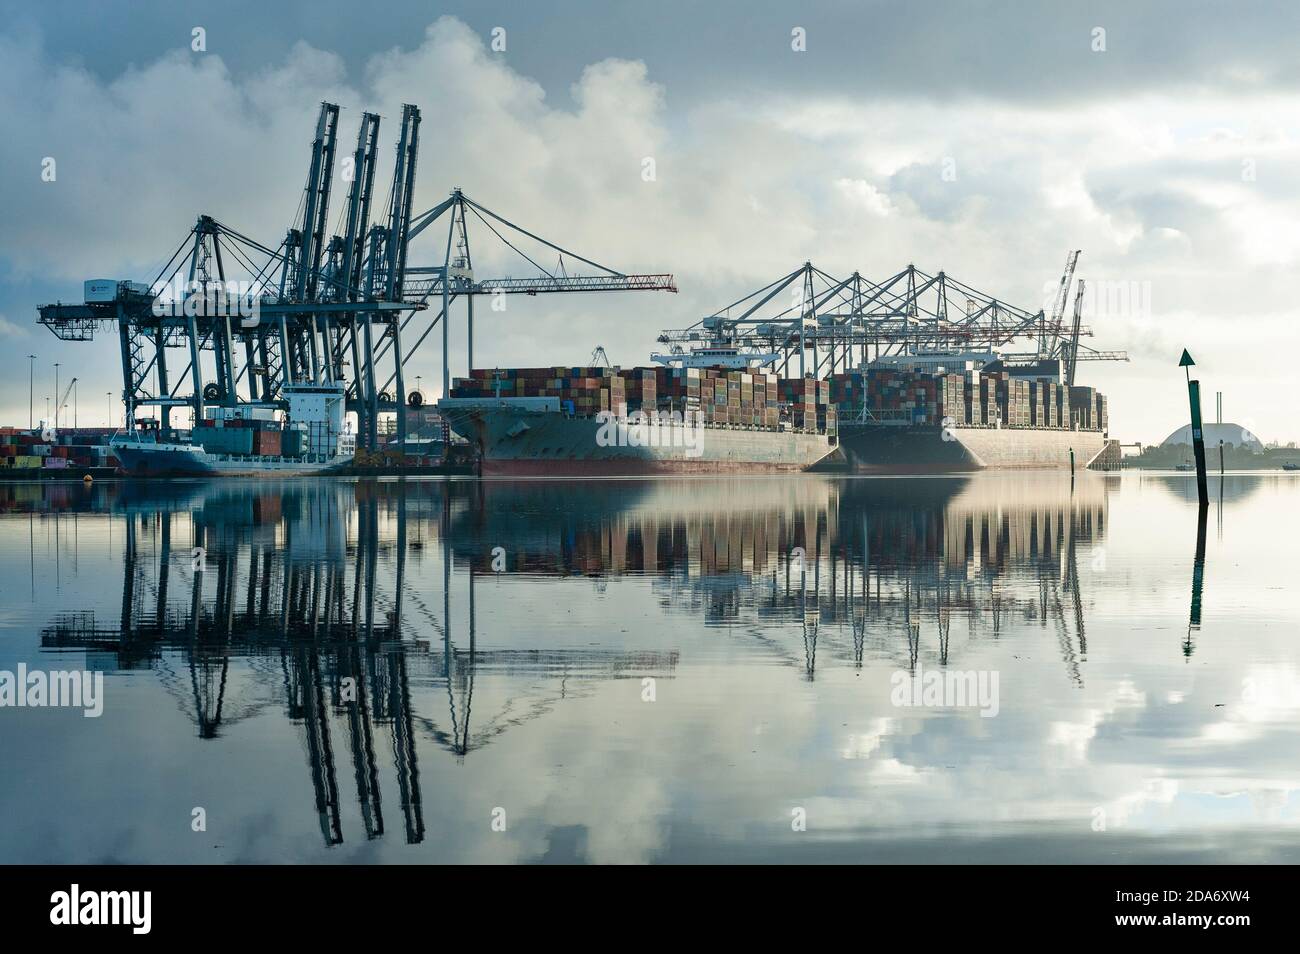 Southampton, UK, 10 Nov, 2020.   Stunning reflections of container ships being loaded with cargo at Southampton docks are cast upon the still morning waters of the River Test. Credit: Morten Watkins/Alamy Live News Stock Photo